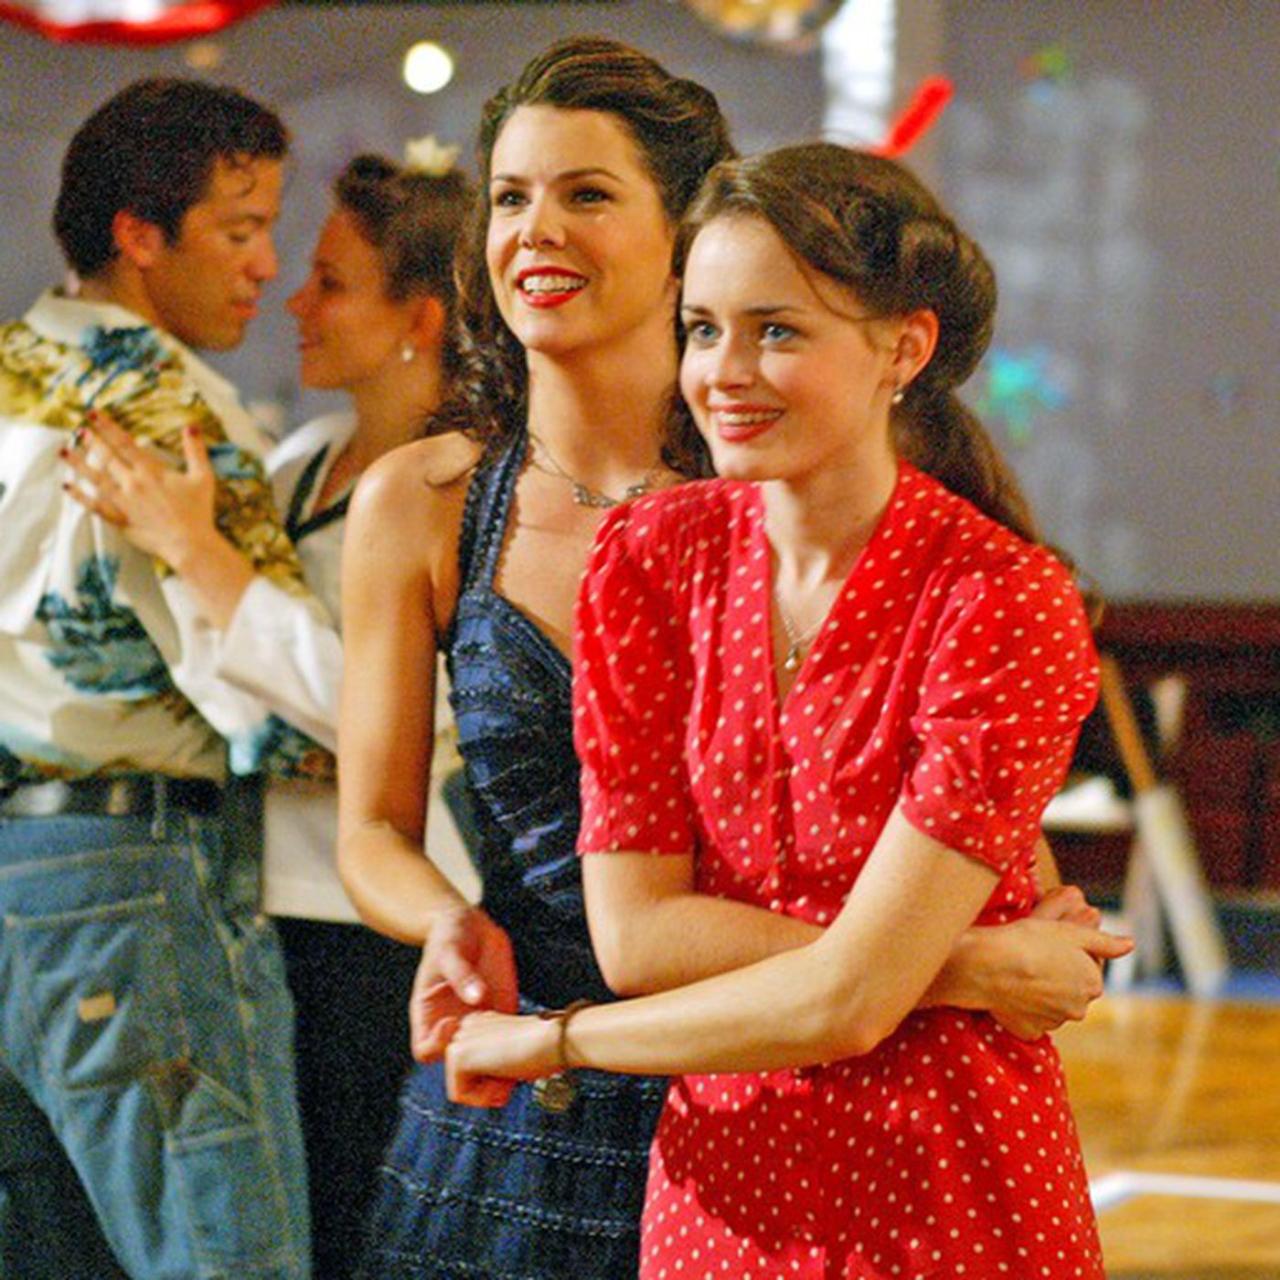 Lorelai and Rory in Gilmore Girls
Lorelai and Rory Gilmore are the OG mother-daughter duo! Lorelai Gilmore is born into a wealthy household, but her rebellious streak is at odds with the rules of the prim and proper Gilmores. Lorelai finds this life pretentious, and runs away with her daughter, Rory to neighbouring small town, Stars Hollow after getting pregnant at 16